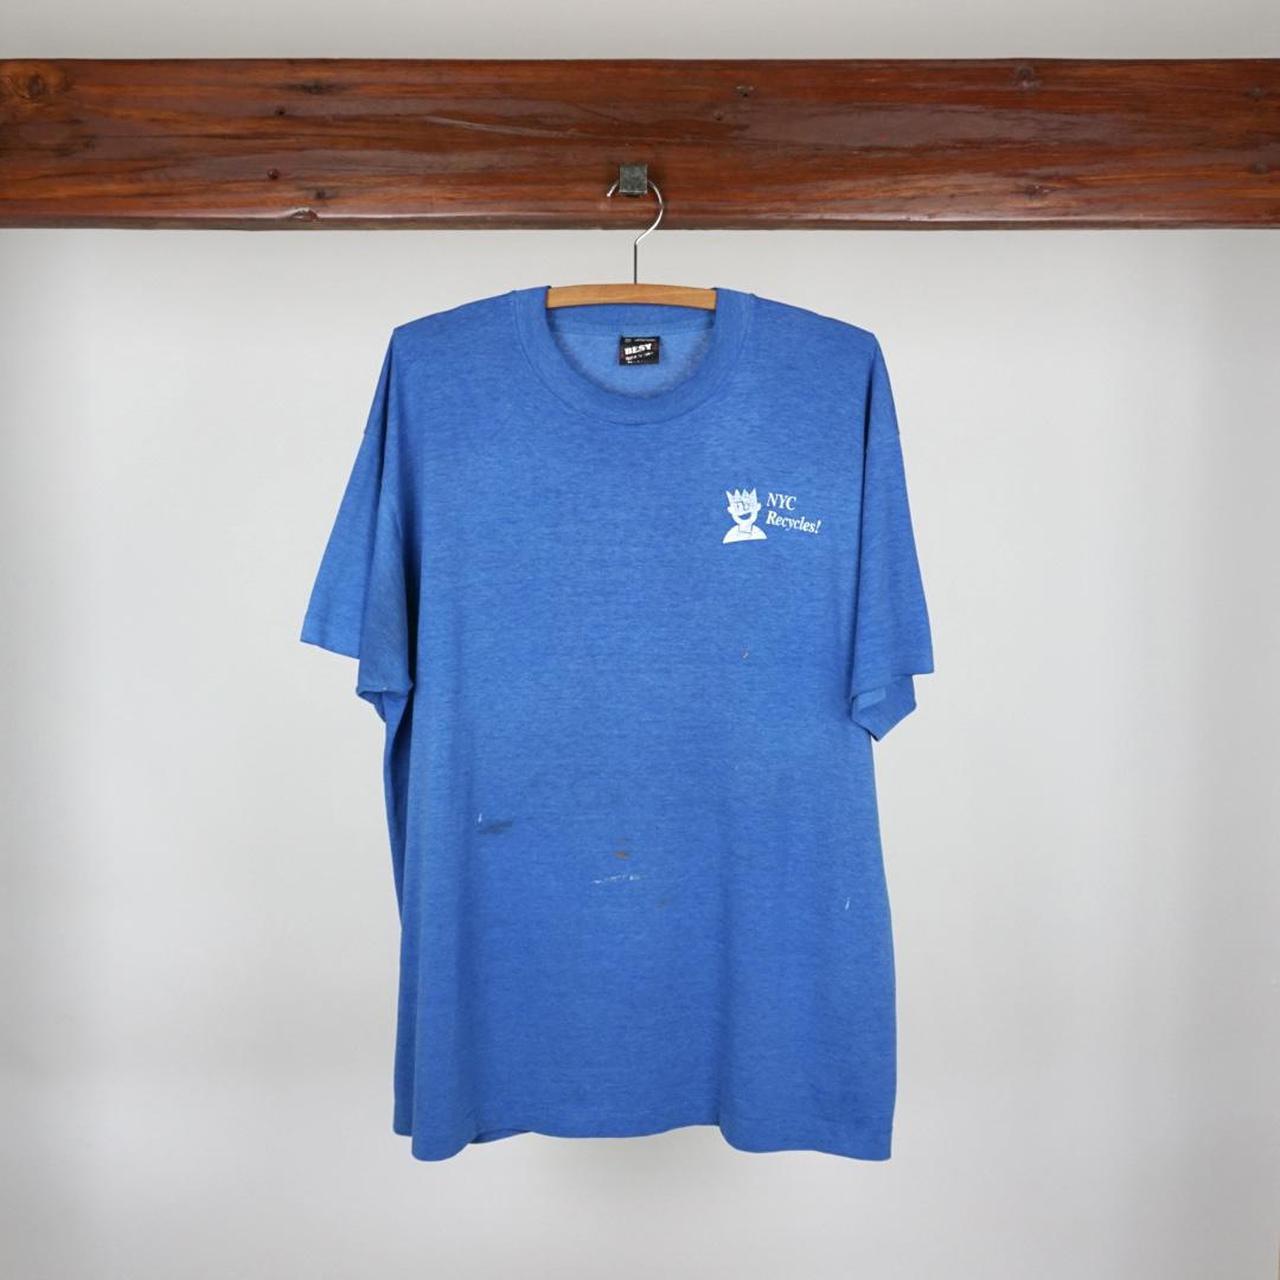 Fruit of the Loom Men's Blue and White T-shirt